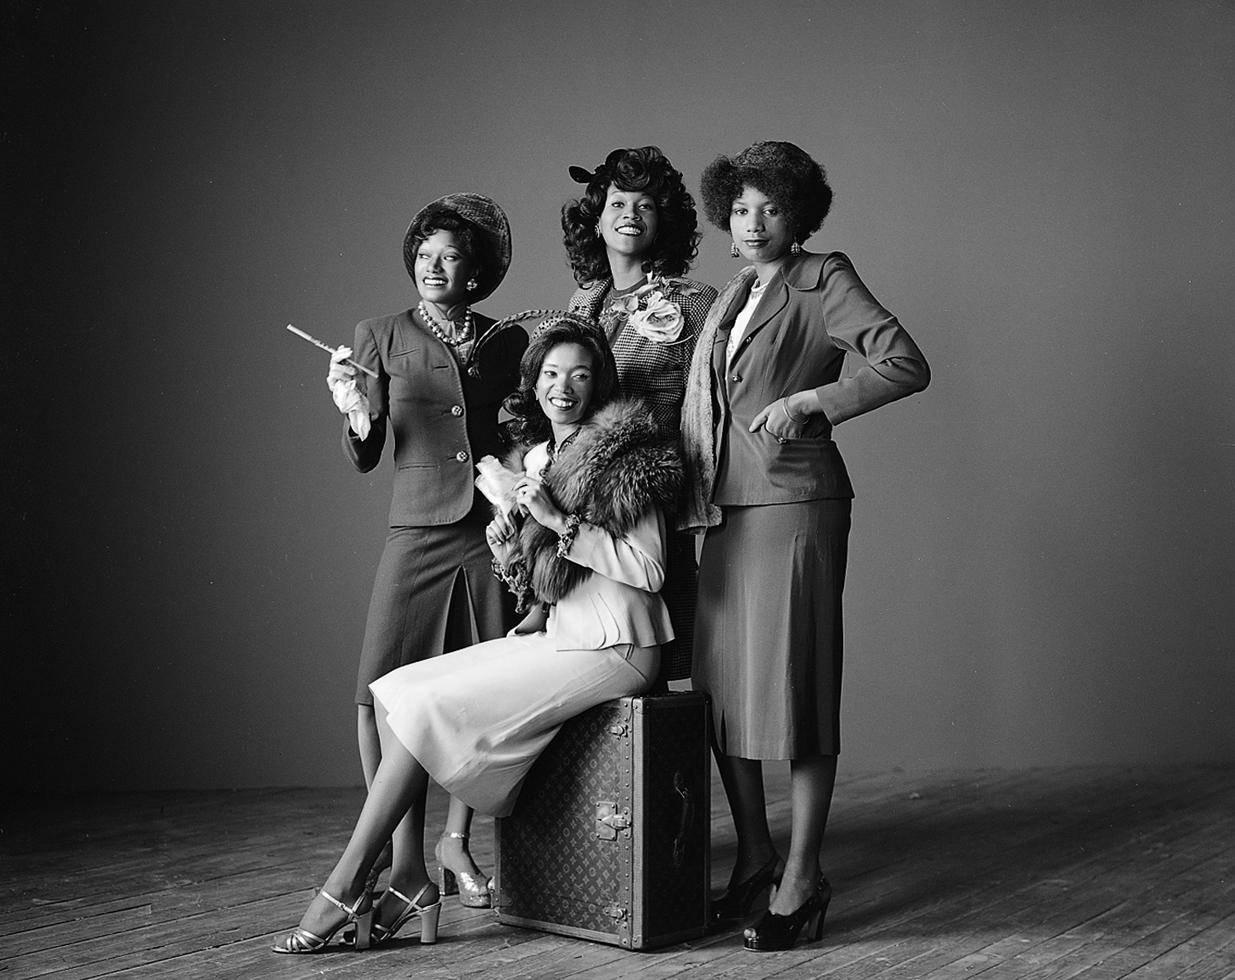 Herb Greene Black and White Photograph - Pointer Sisters, San Francisco, CA